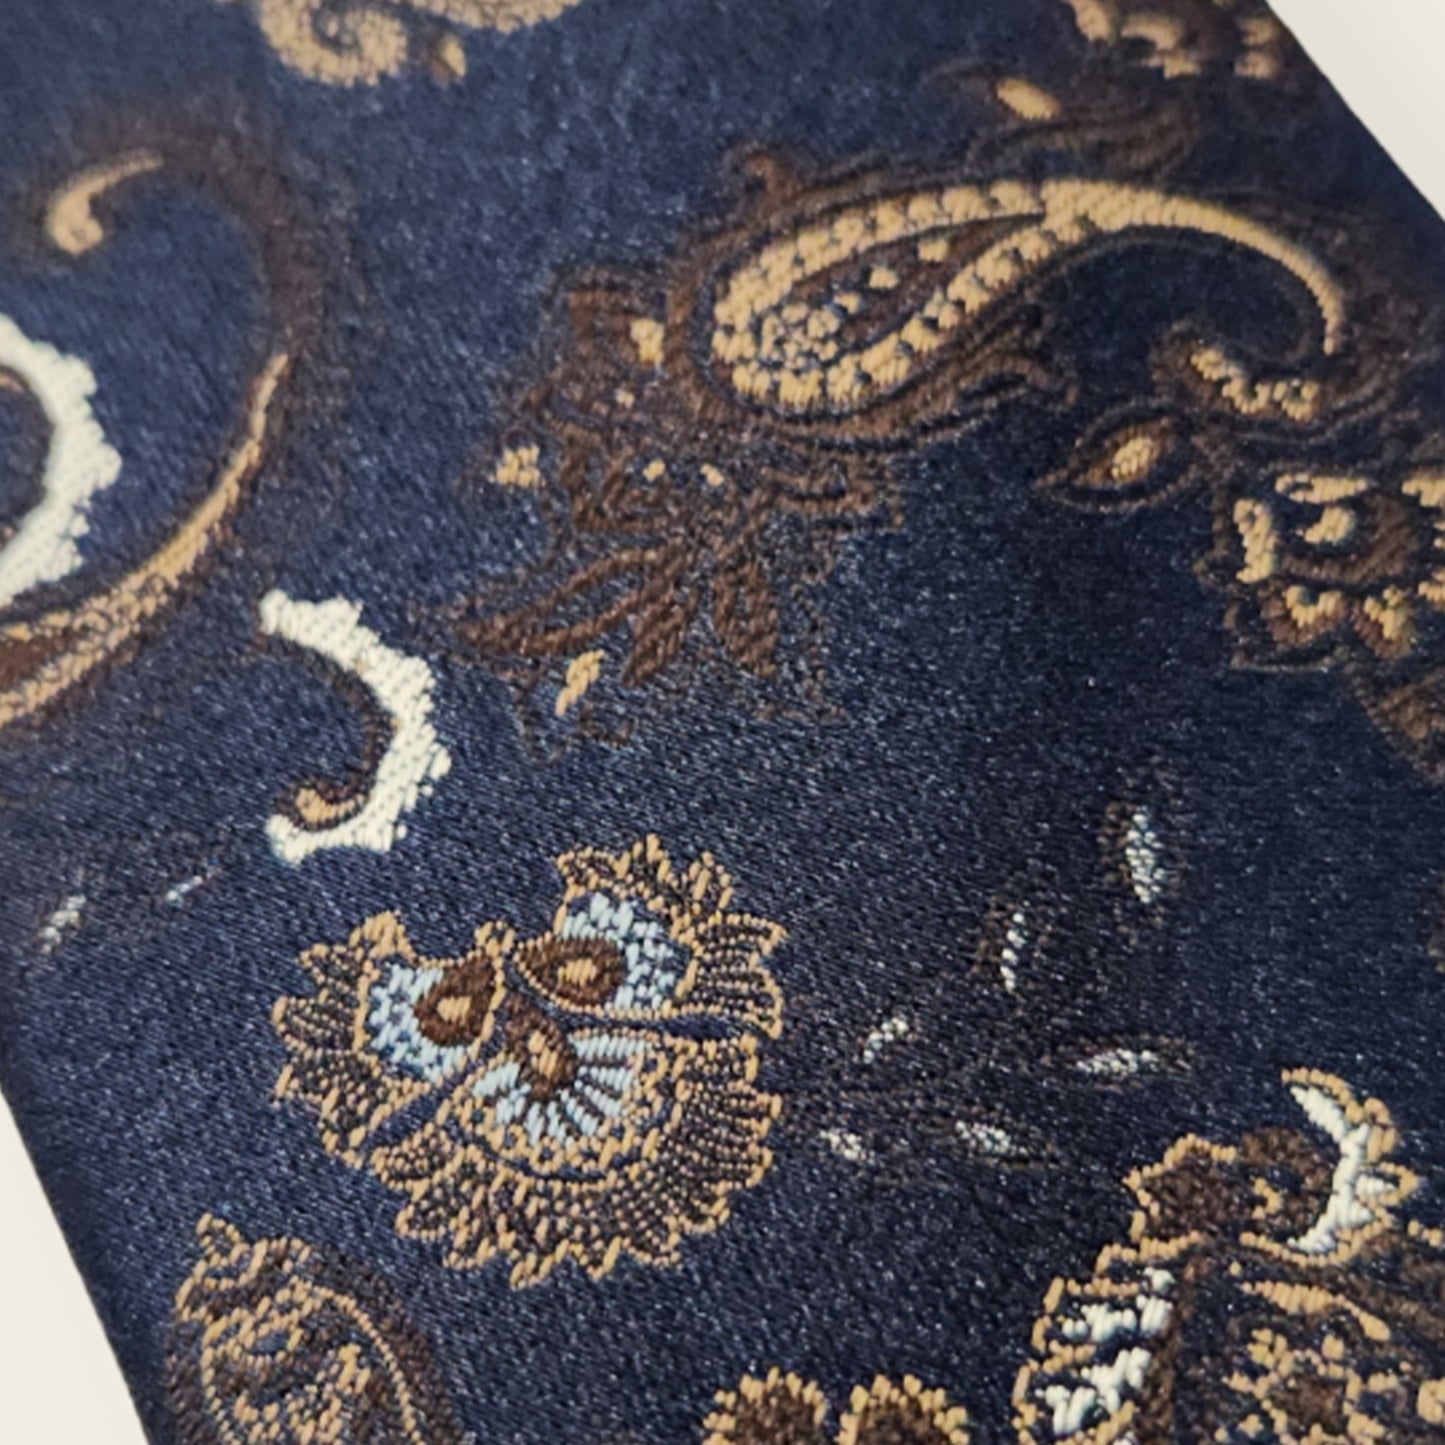 Tie and Hankie Set - Paisley Navy and Brown I172623